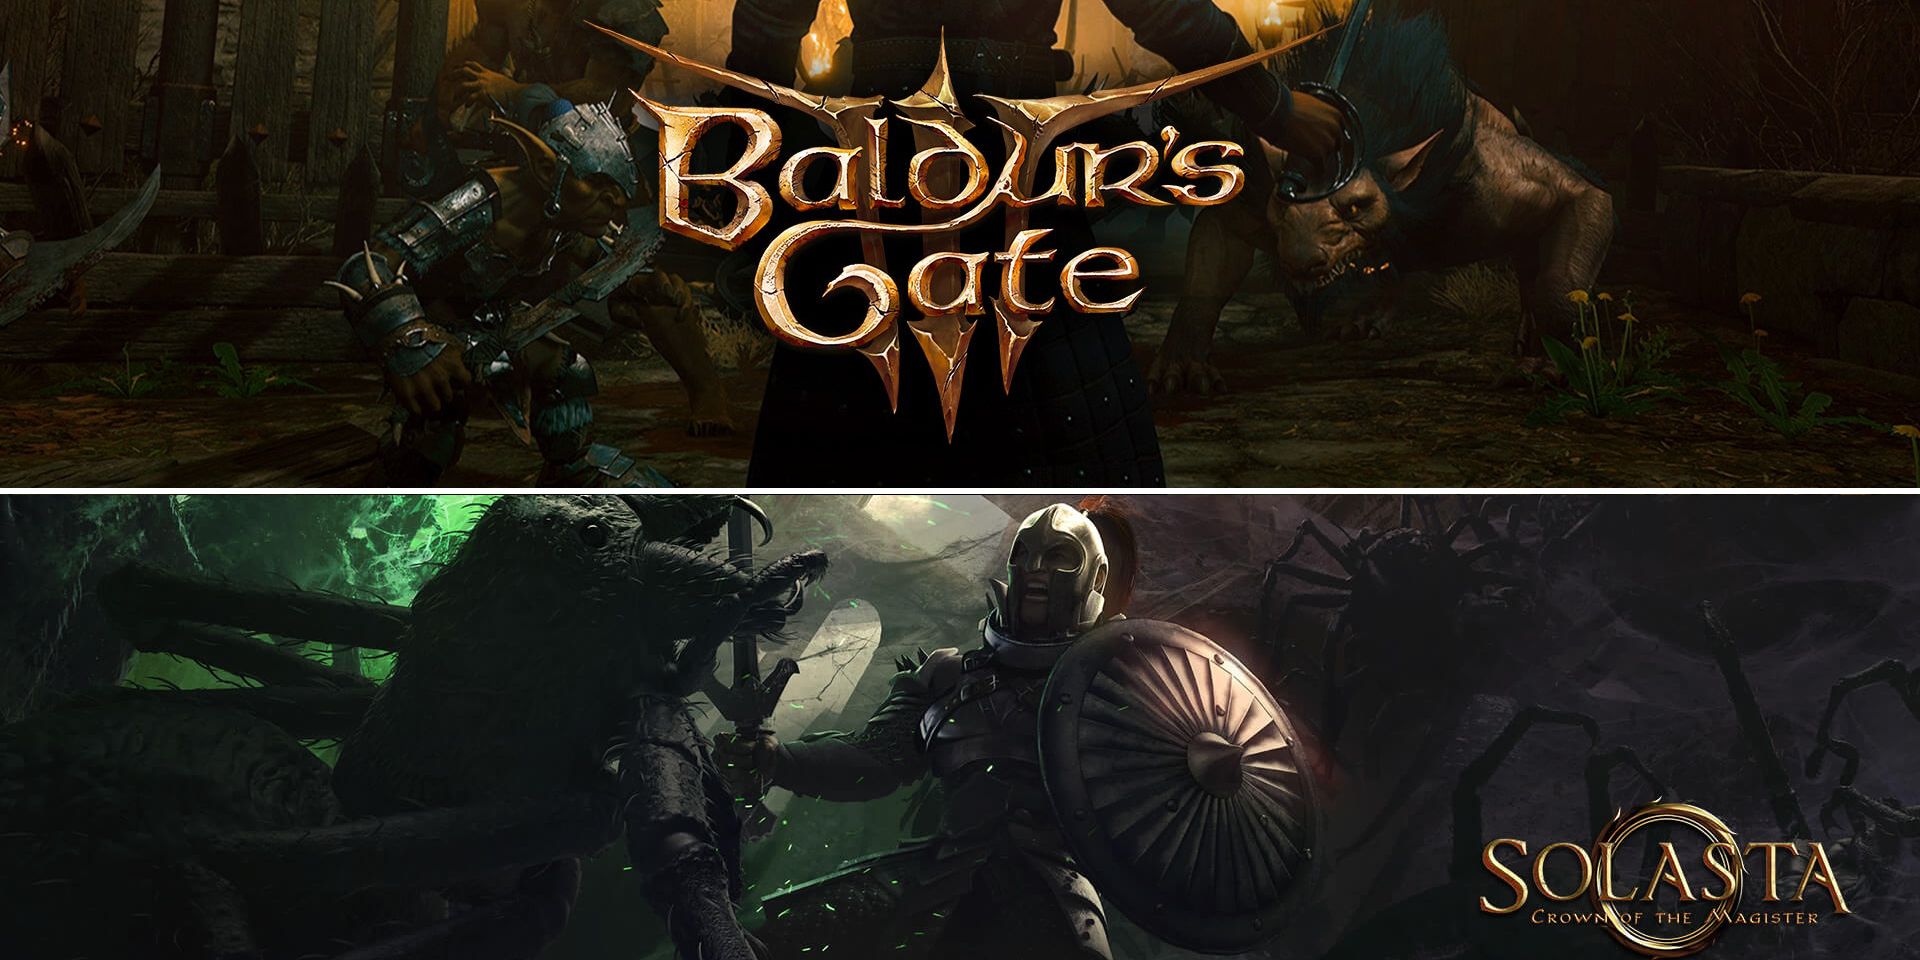 Which D&D Game Is More Authentic Baldurs Gate 3 or Solasta